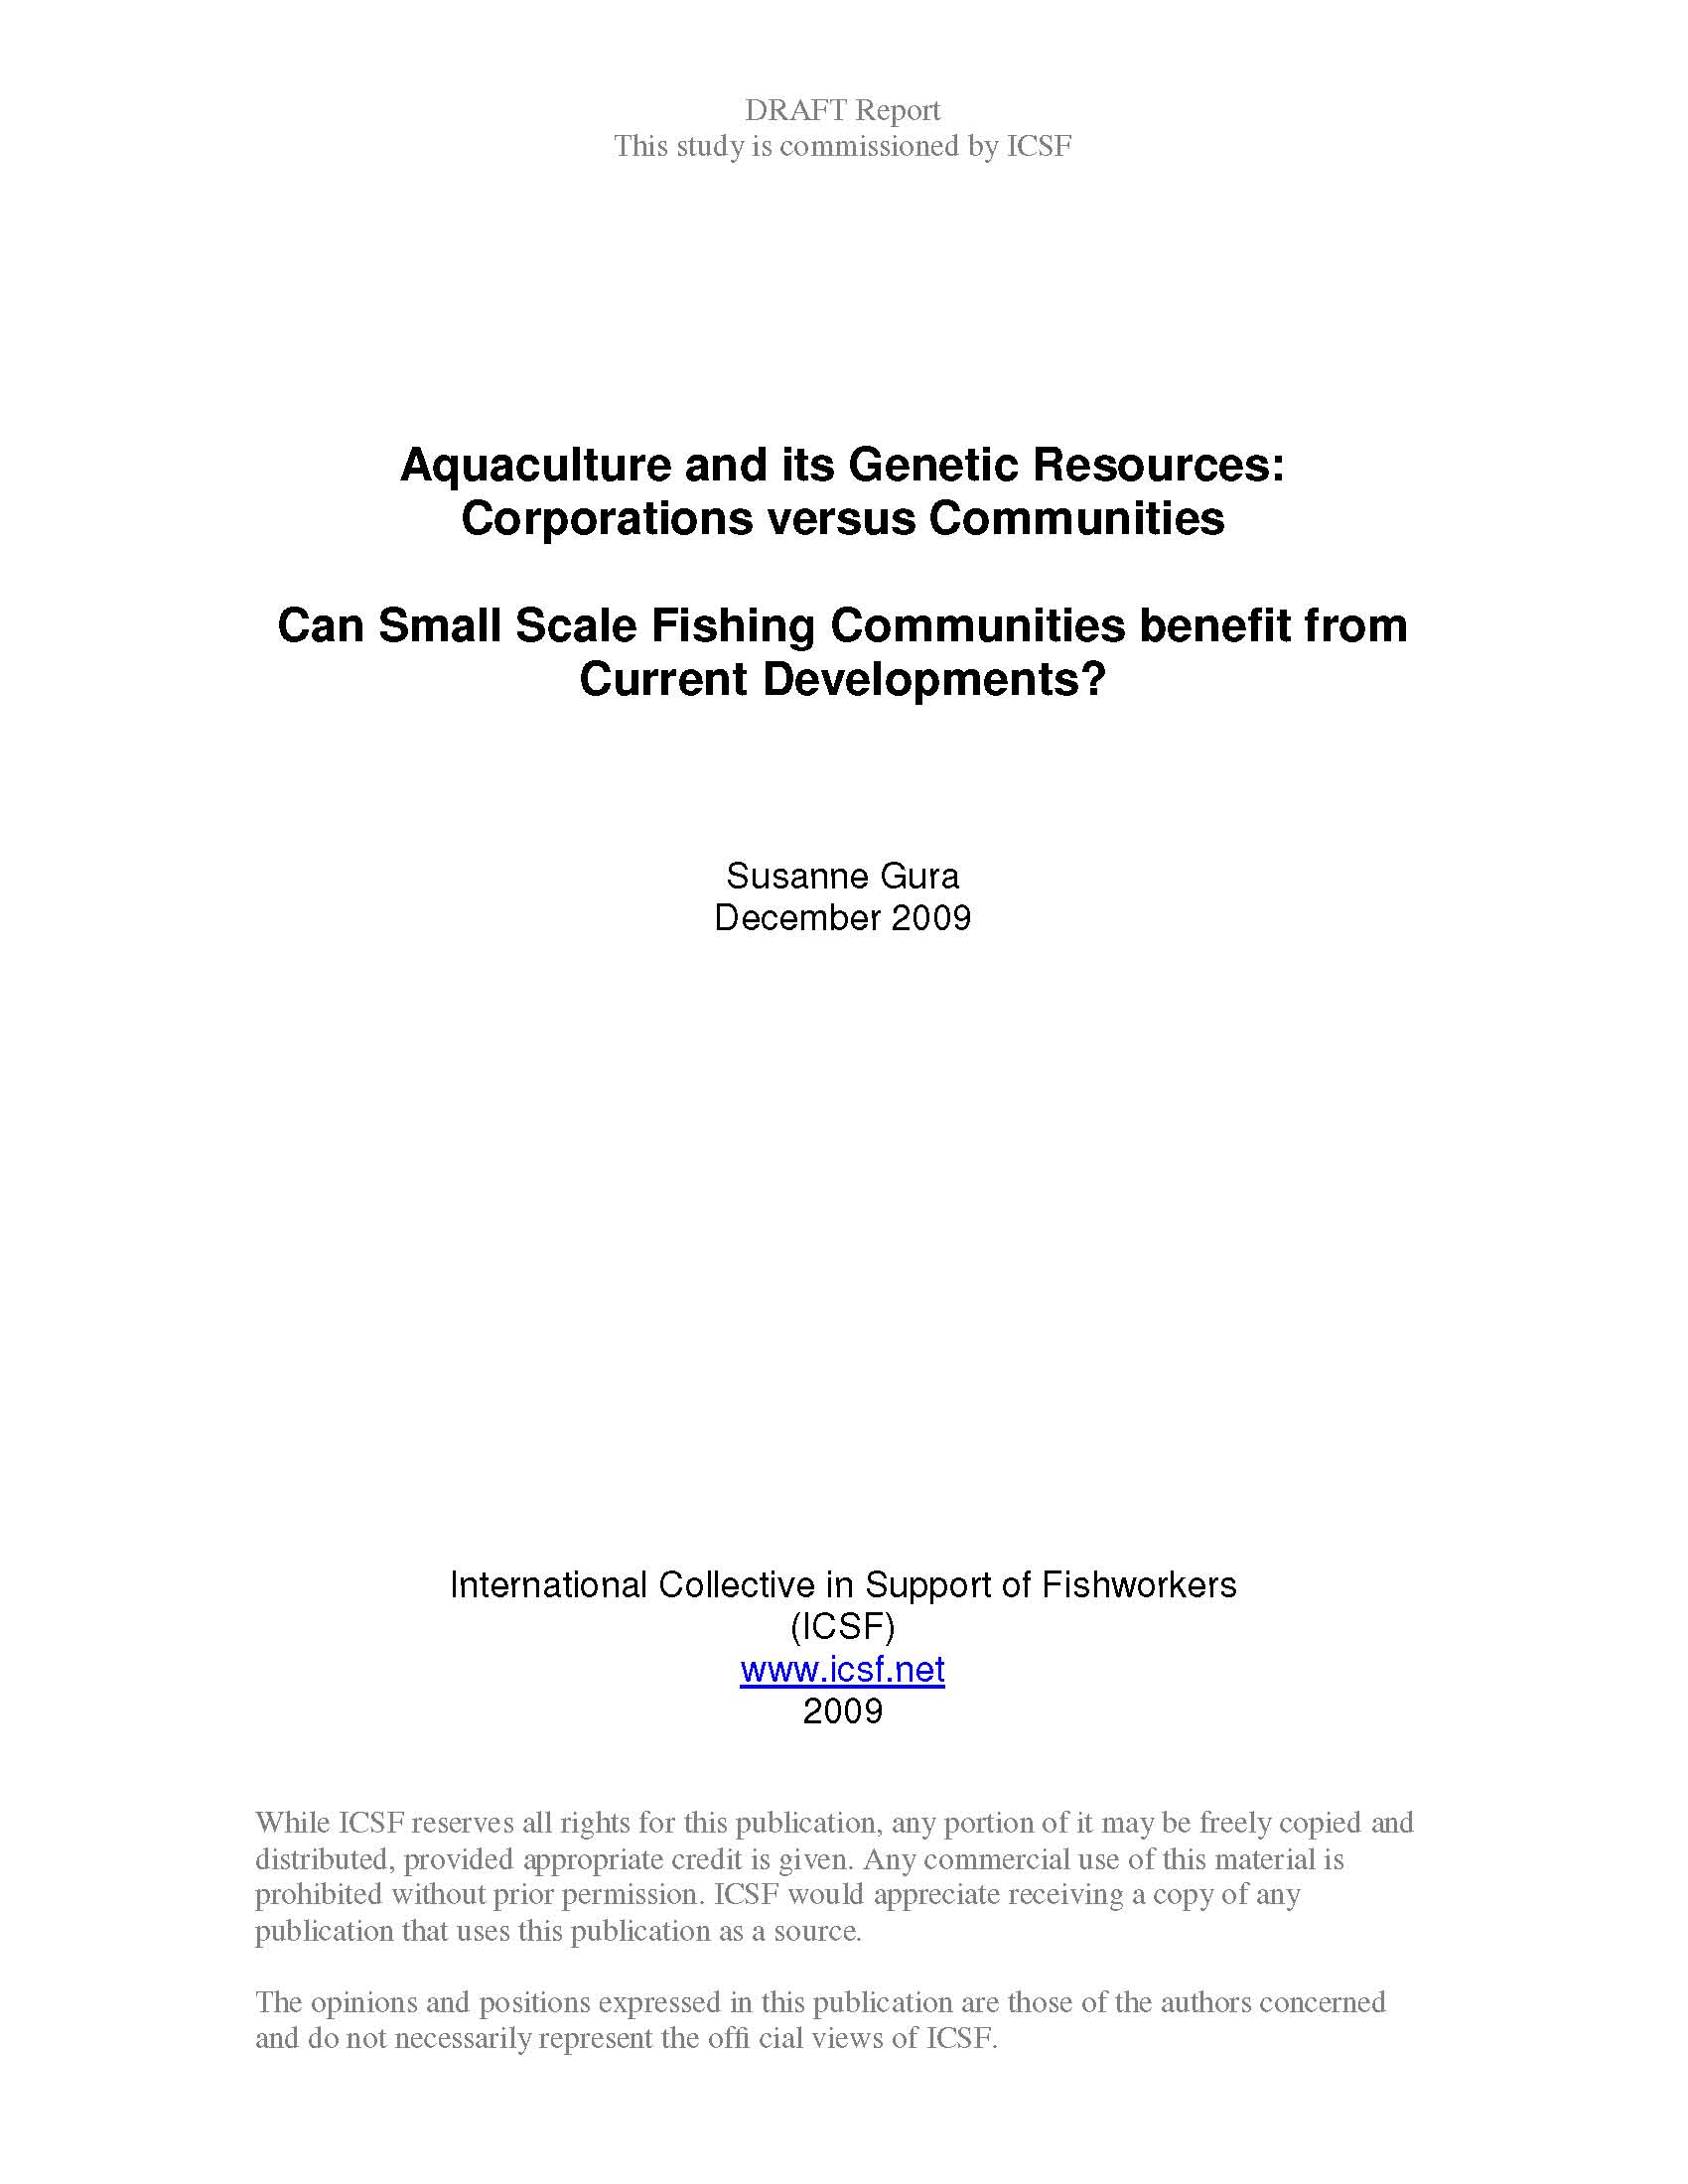 Aquaculture and its Genetic Resources: Corporations versus Communities Can Small Scale Fishing Communities benefit from Current Developments?